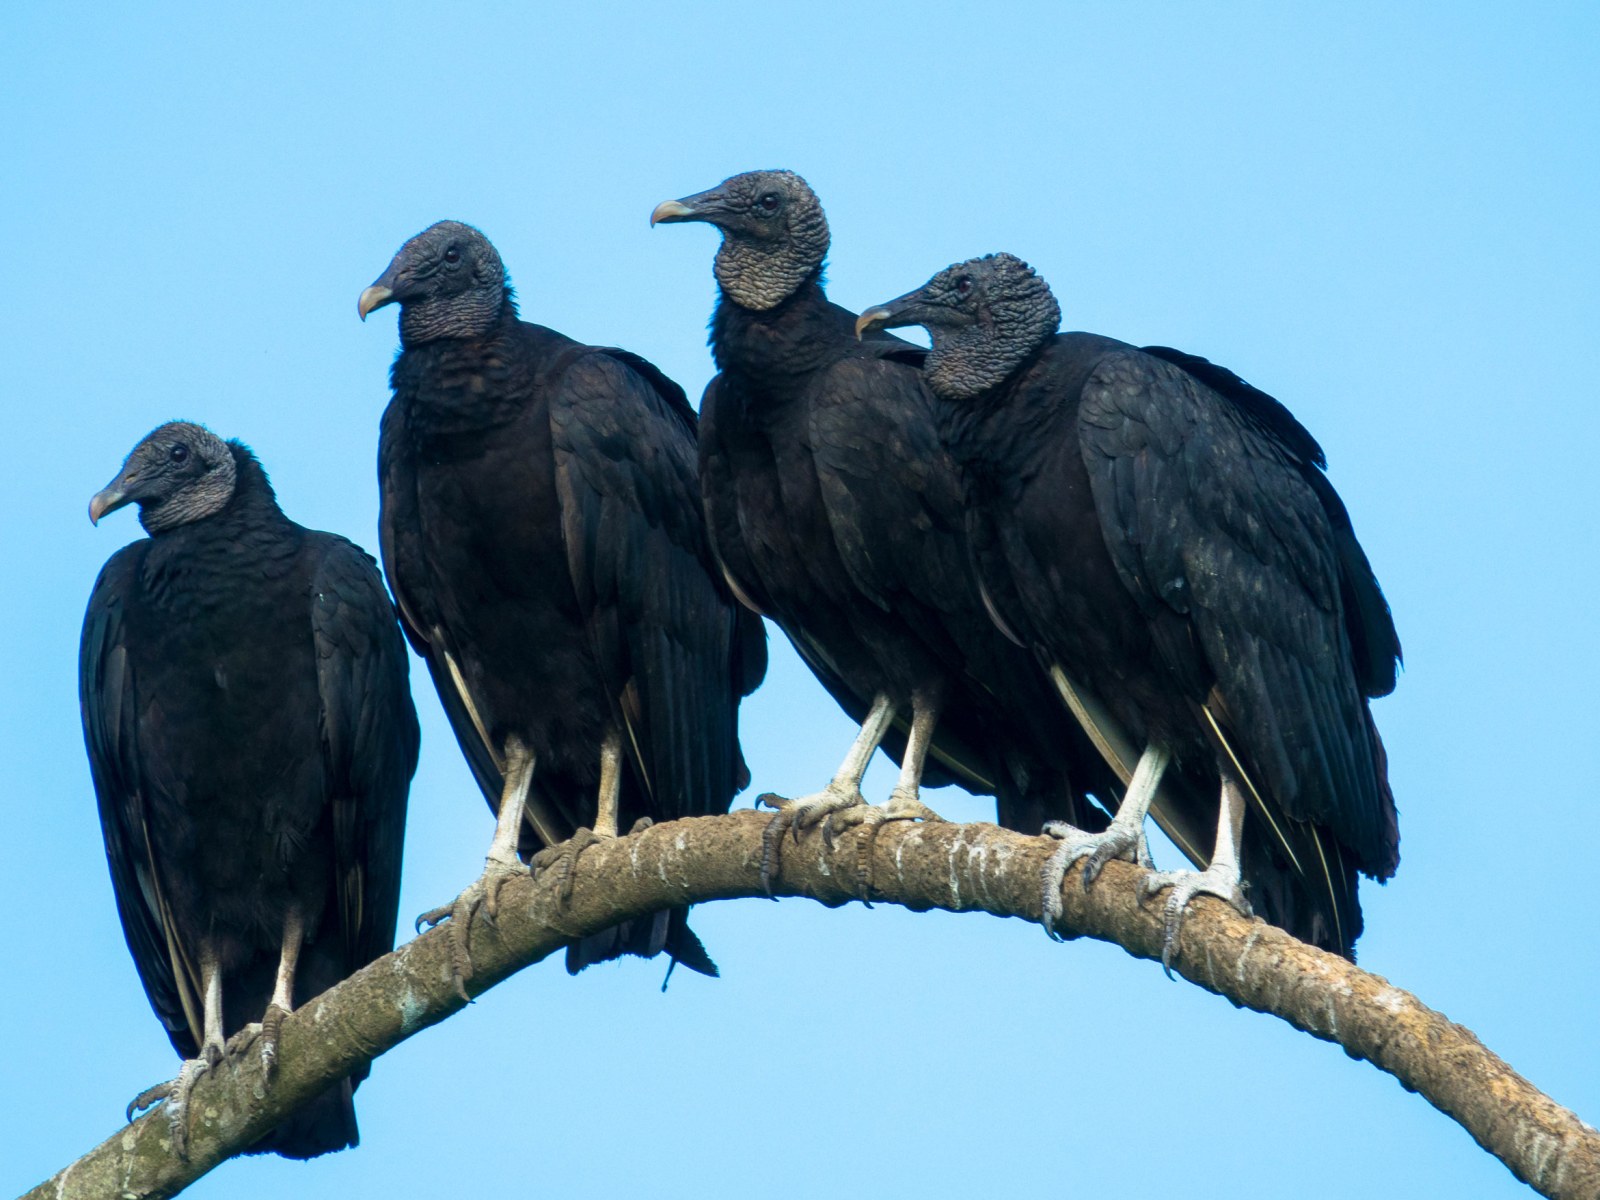 Turkey vultures may seem ominous, but they're also wise and